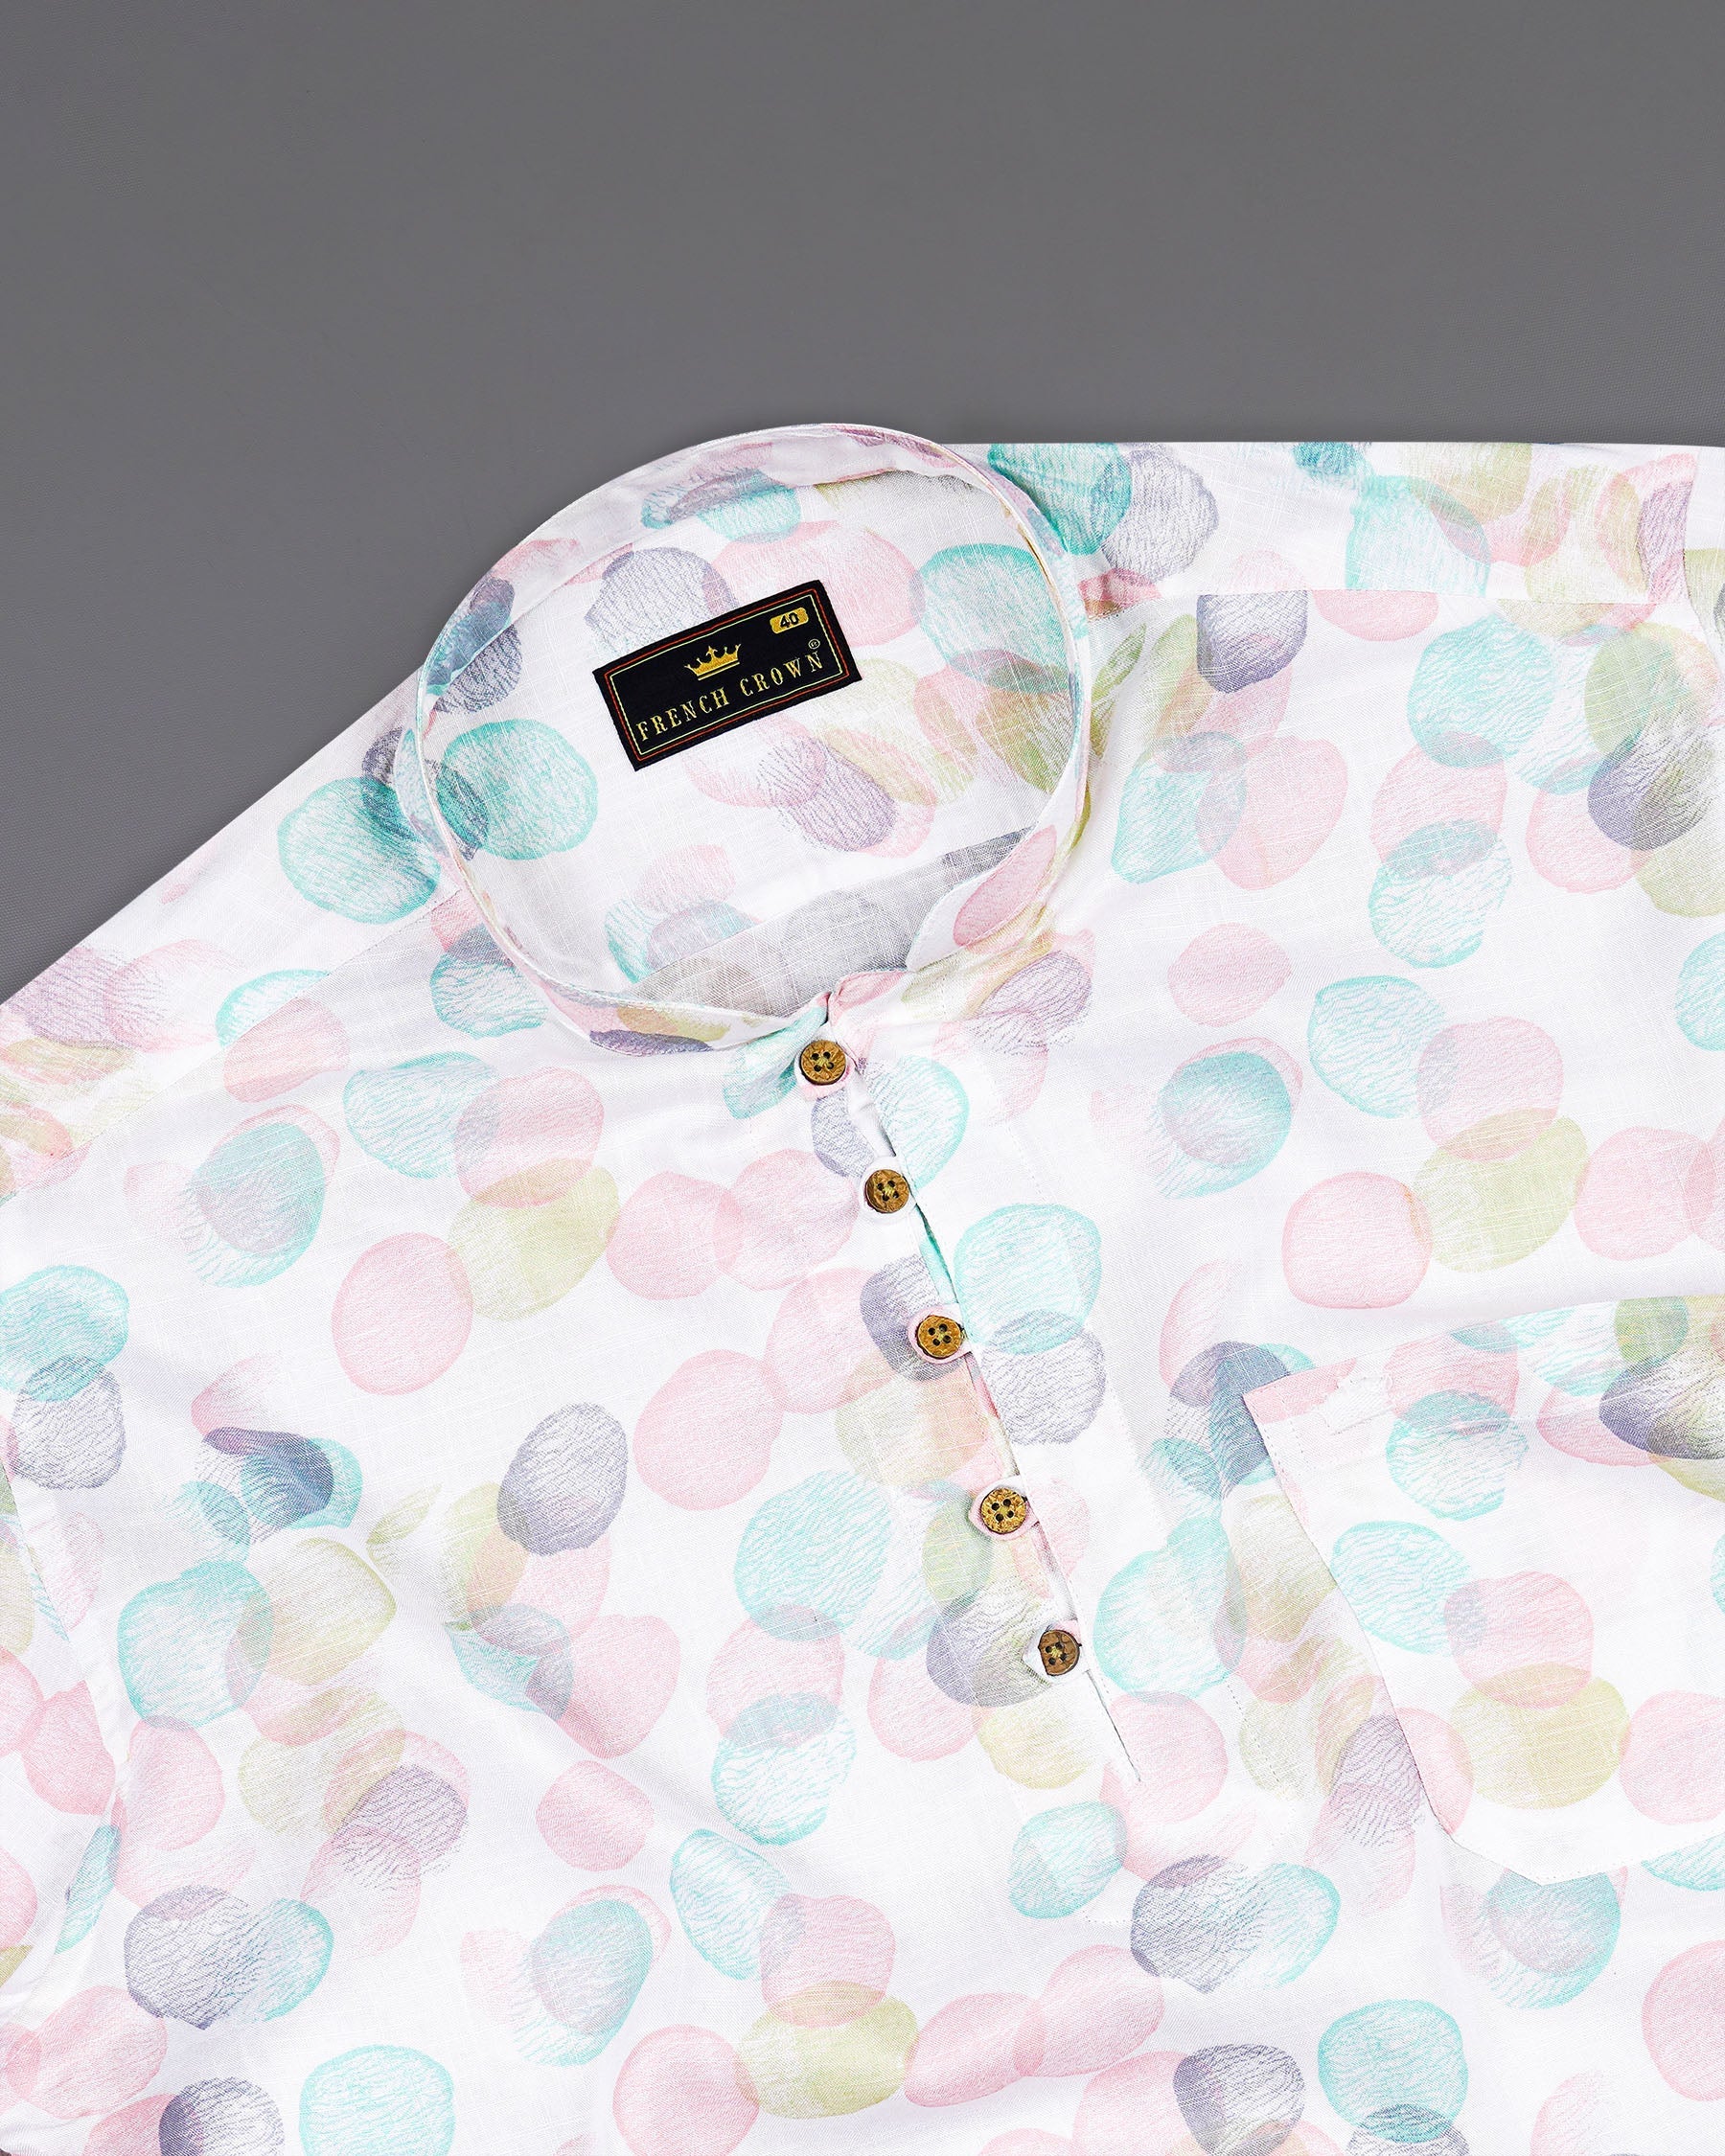 Iceberg Blue and Quill Pink Polka Dotted Premium Tencel Kurta Shirt  7923-KS -38,7923-KS -H-38,7923-KS -39,7923-KS -H-39,7923-KS -40,7923-KS -H-40,7923-KS -42,7923-KS -H-42,7923-KS -44,7923-KS -H-44,7923-KS -46,7923-KS -H-46,7923-KS -48,7923-KS -H-48,7923-KS -50,7923-KS -H-50,7923-KS -52,7923-KS -H-52